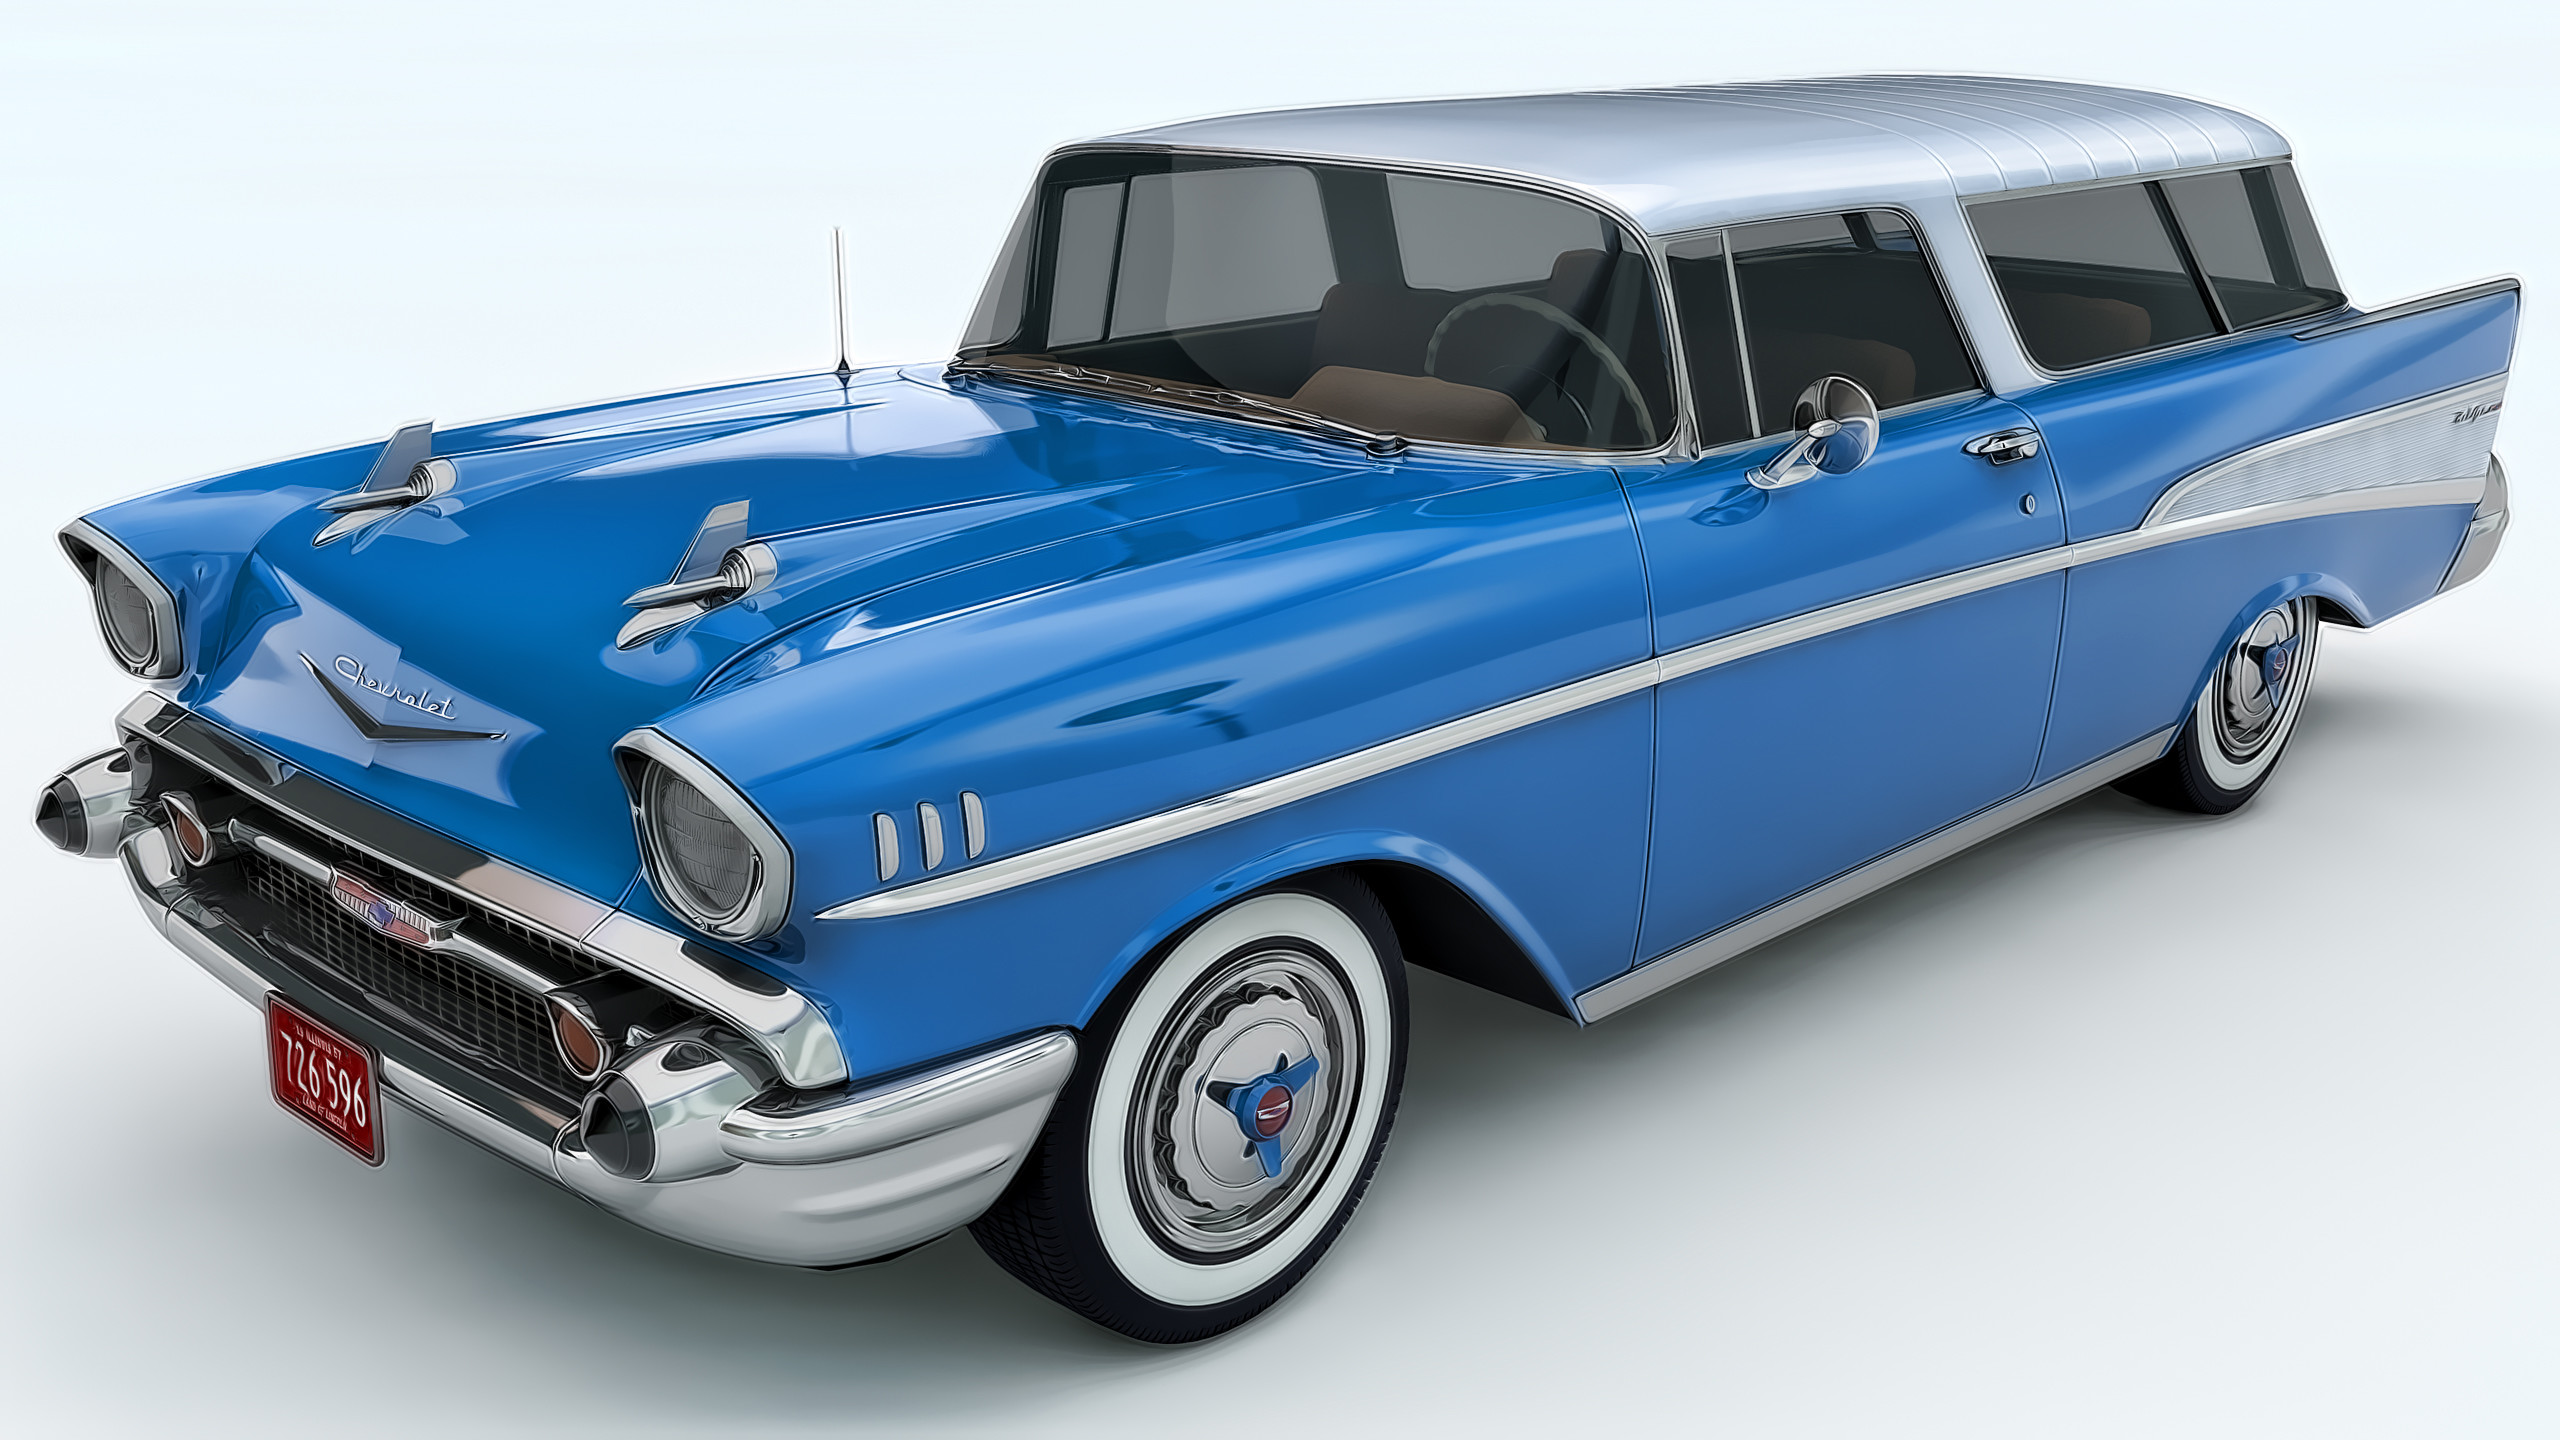 2560x1440 1957 Chevy Nomad by SamCurry 1957 Chevy Nomad by SamCurry